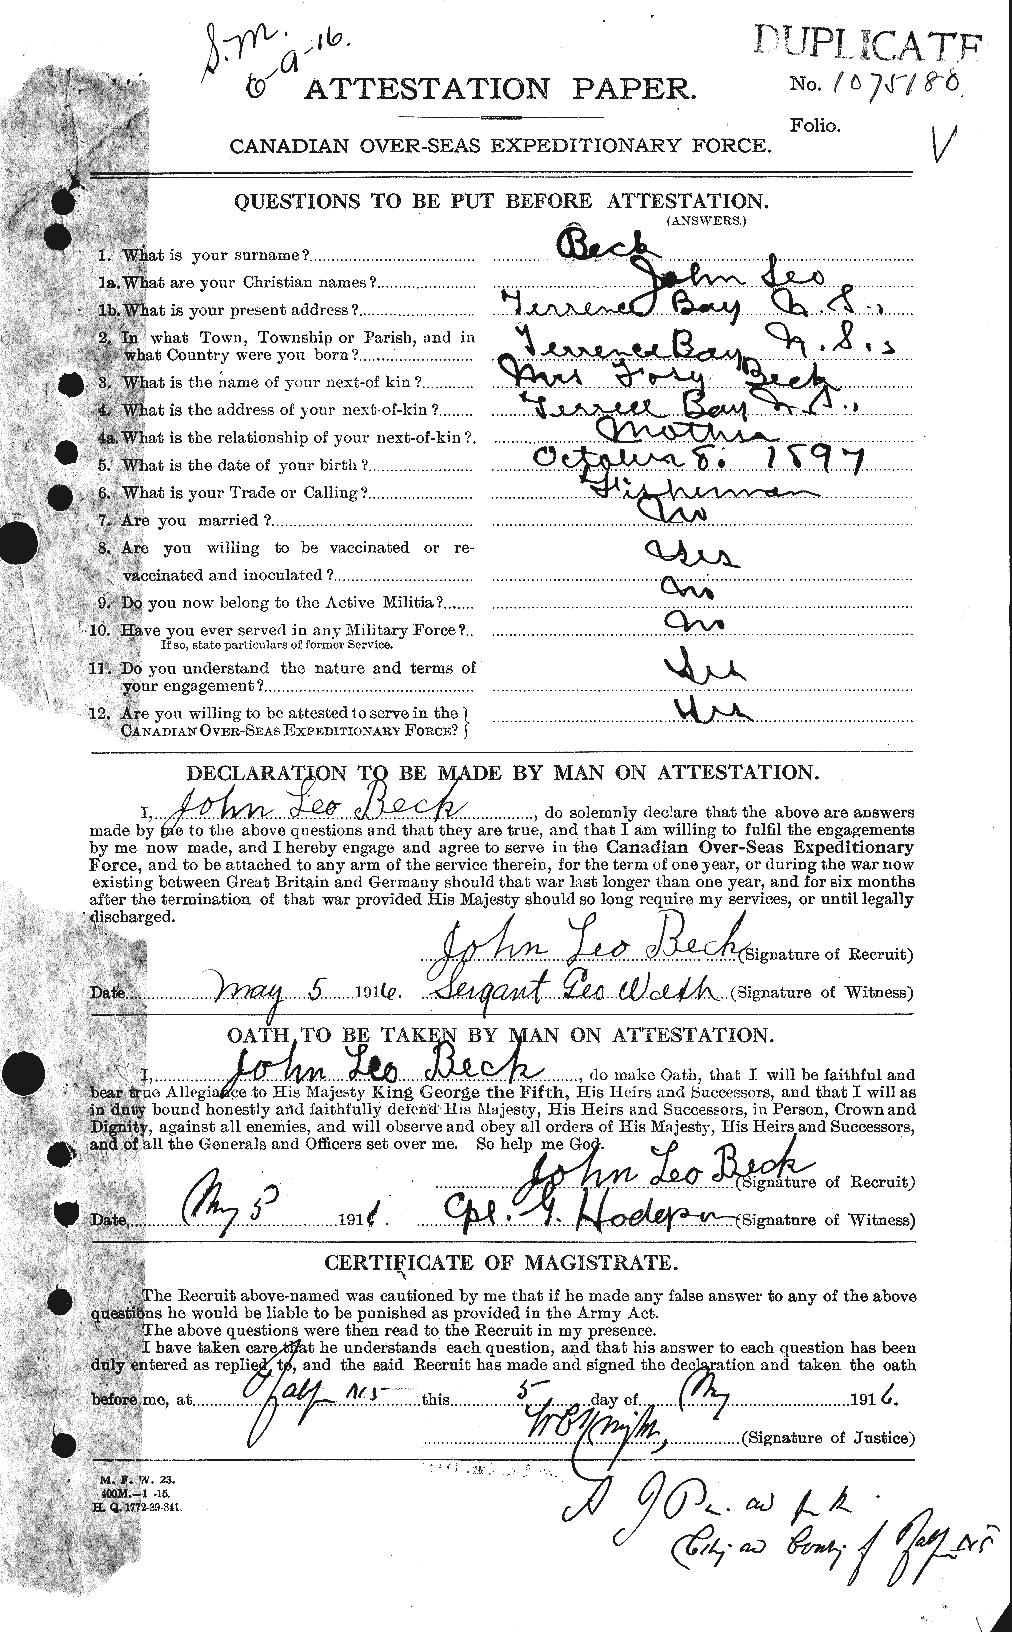 Personnel Records of the First World War - CEF 232179a